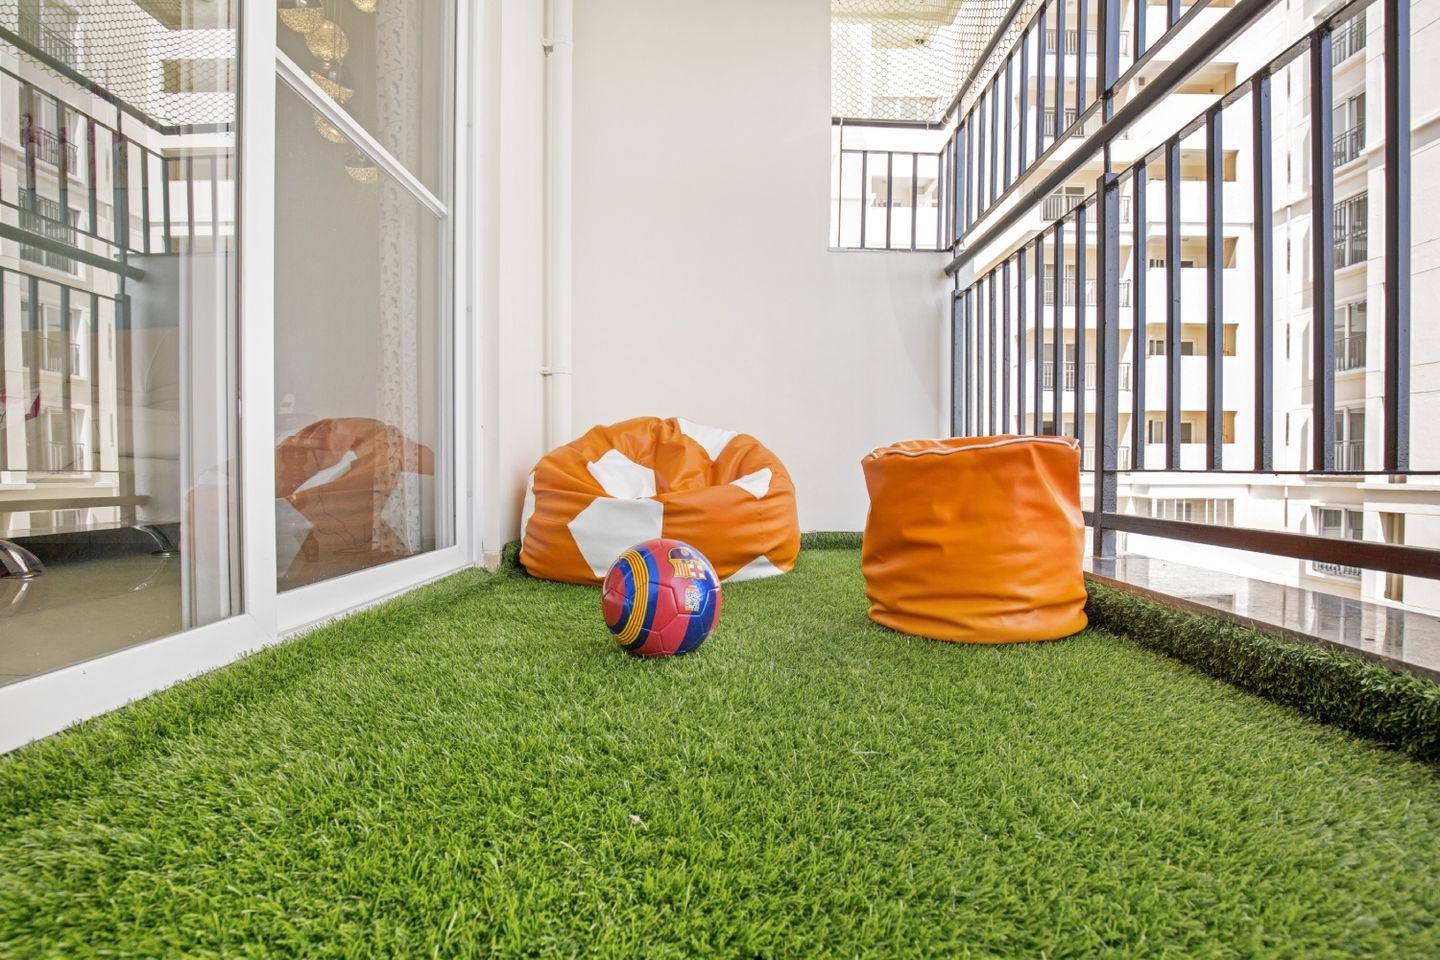 Minimal Balcony Design with Off-White Wall, Green Grass Mat, Orange Pouffe, and Beanbag - Livspace